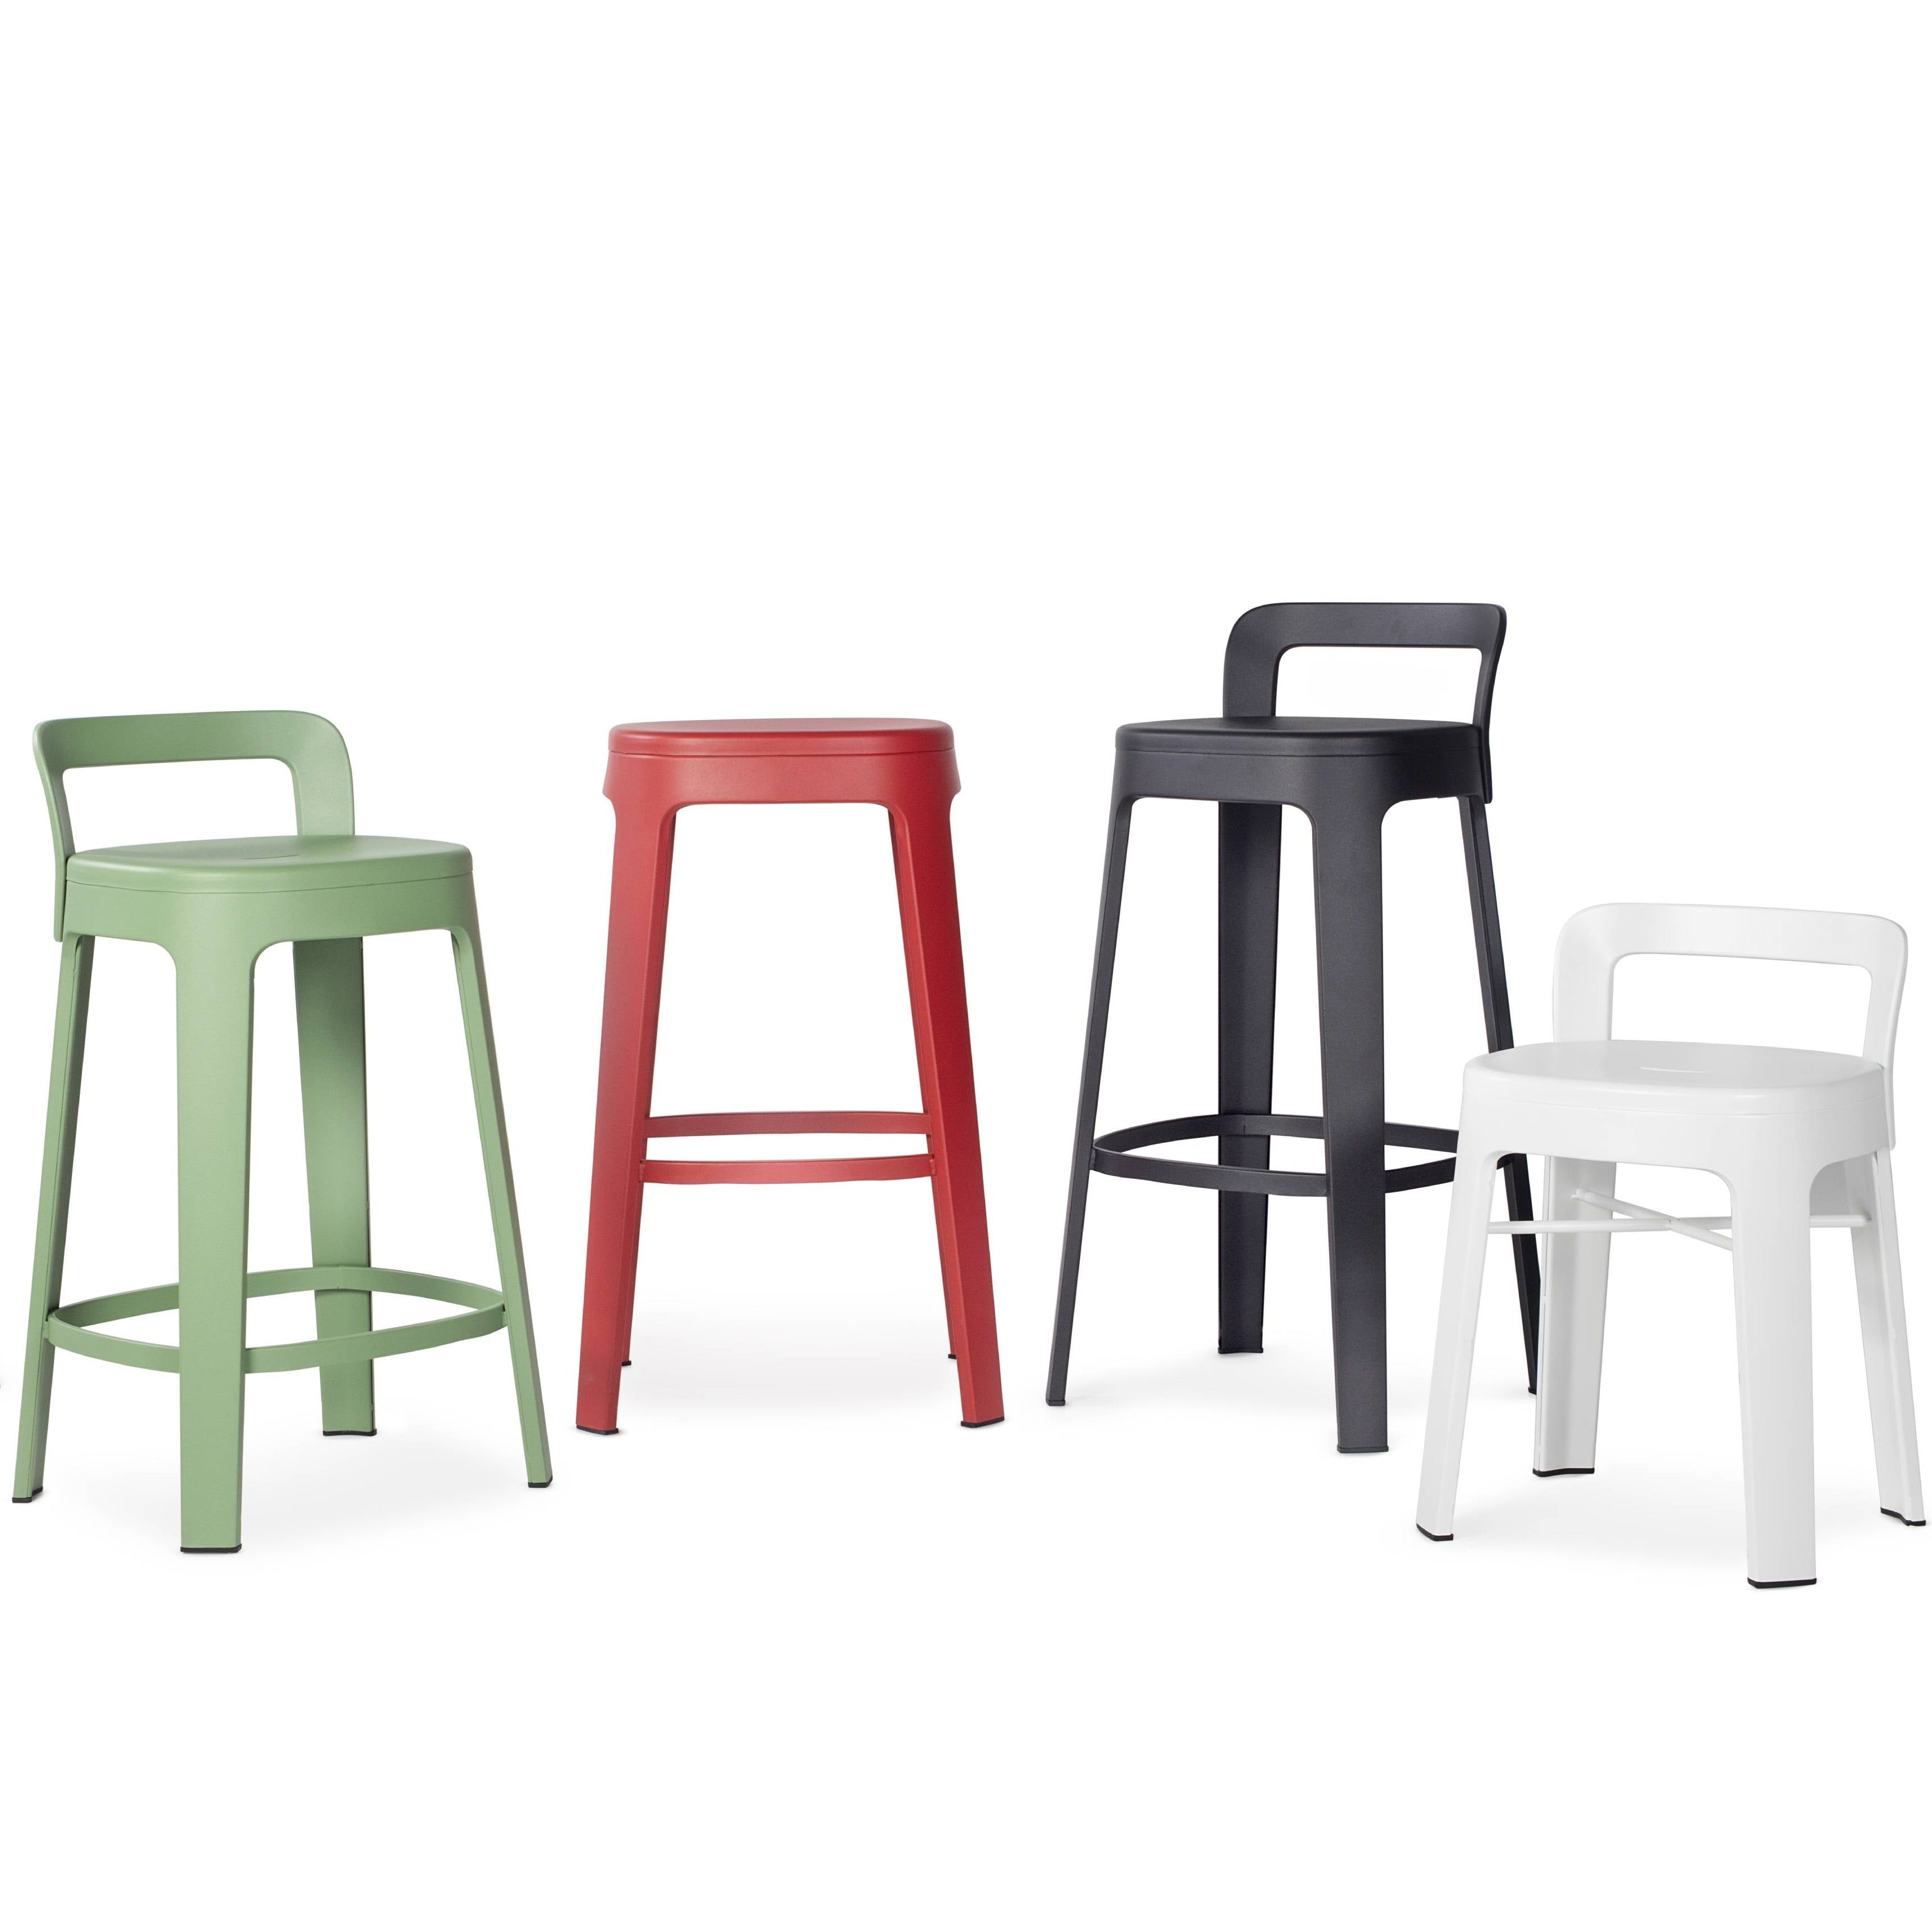 Ombra Stool with Backrest